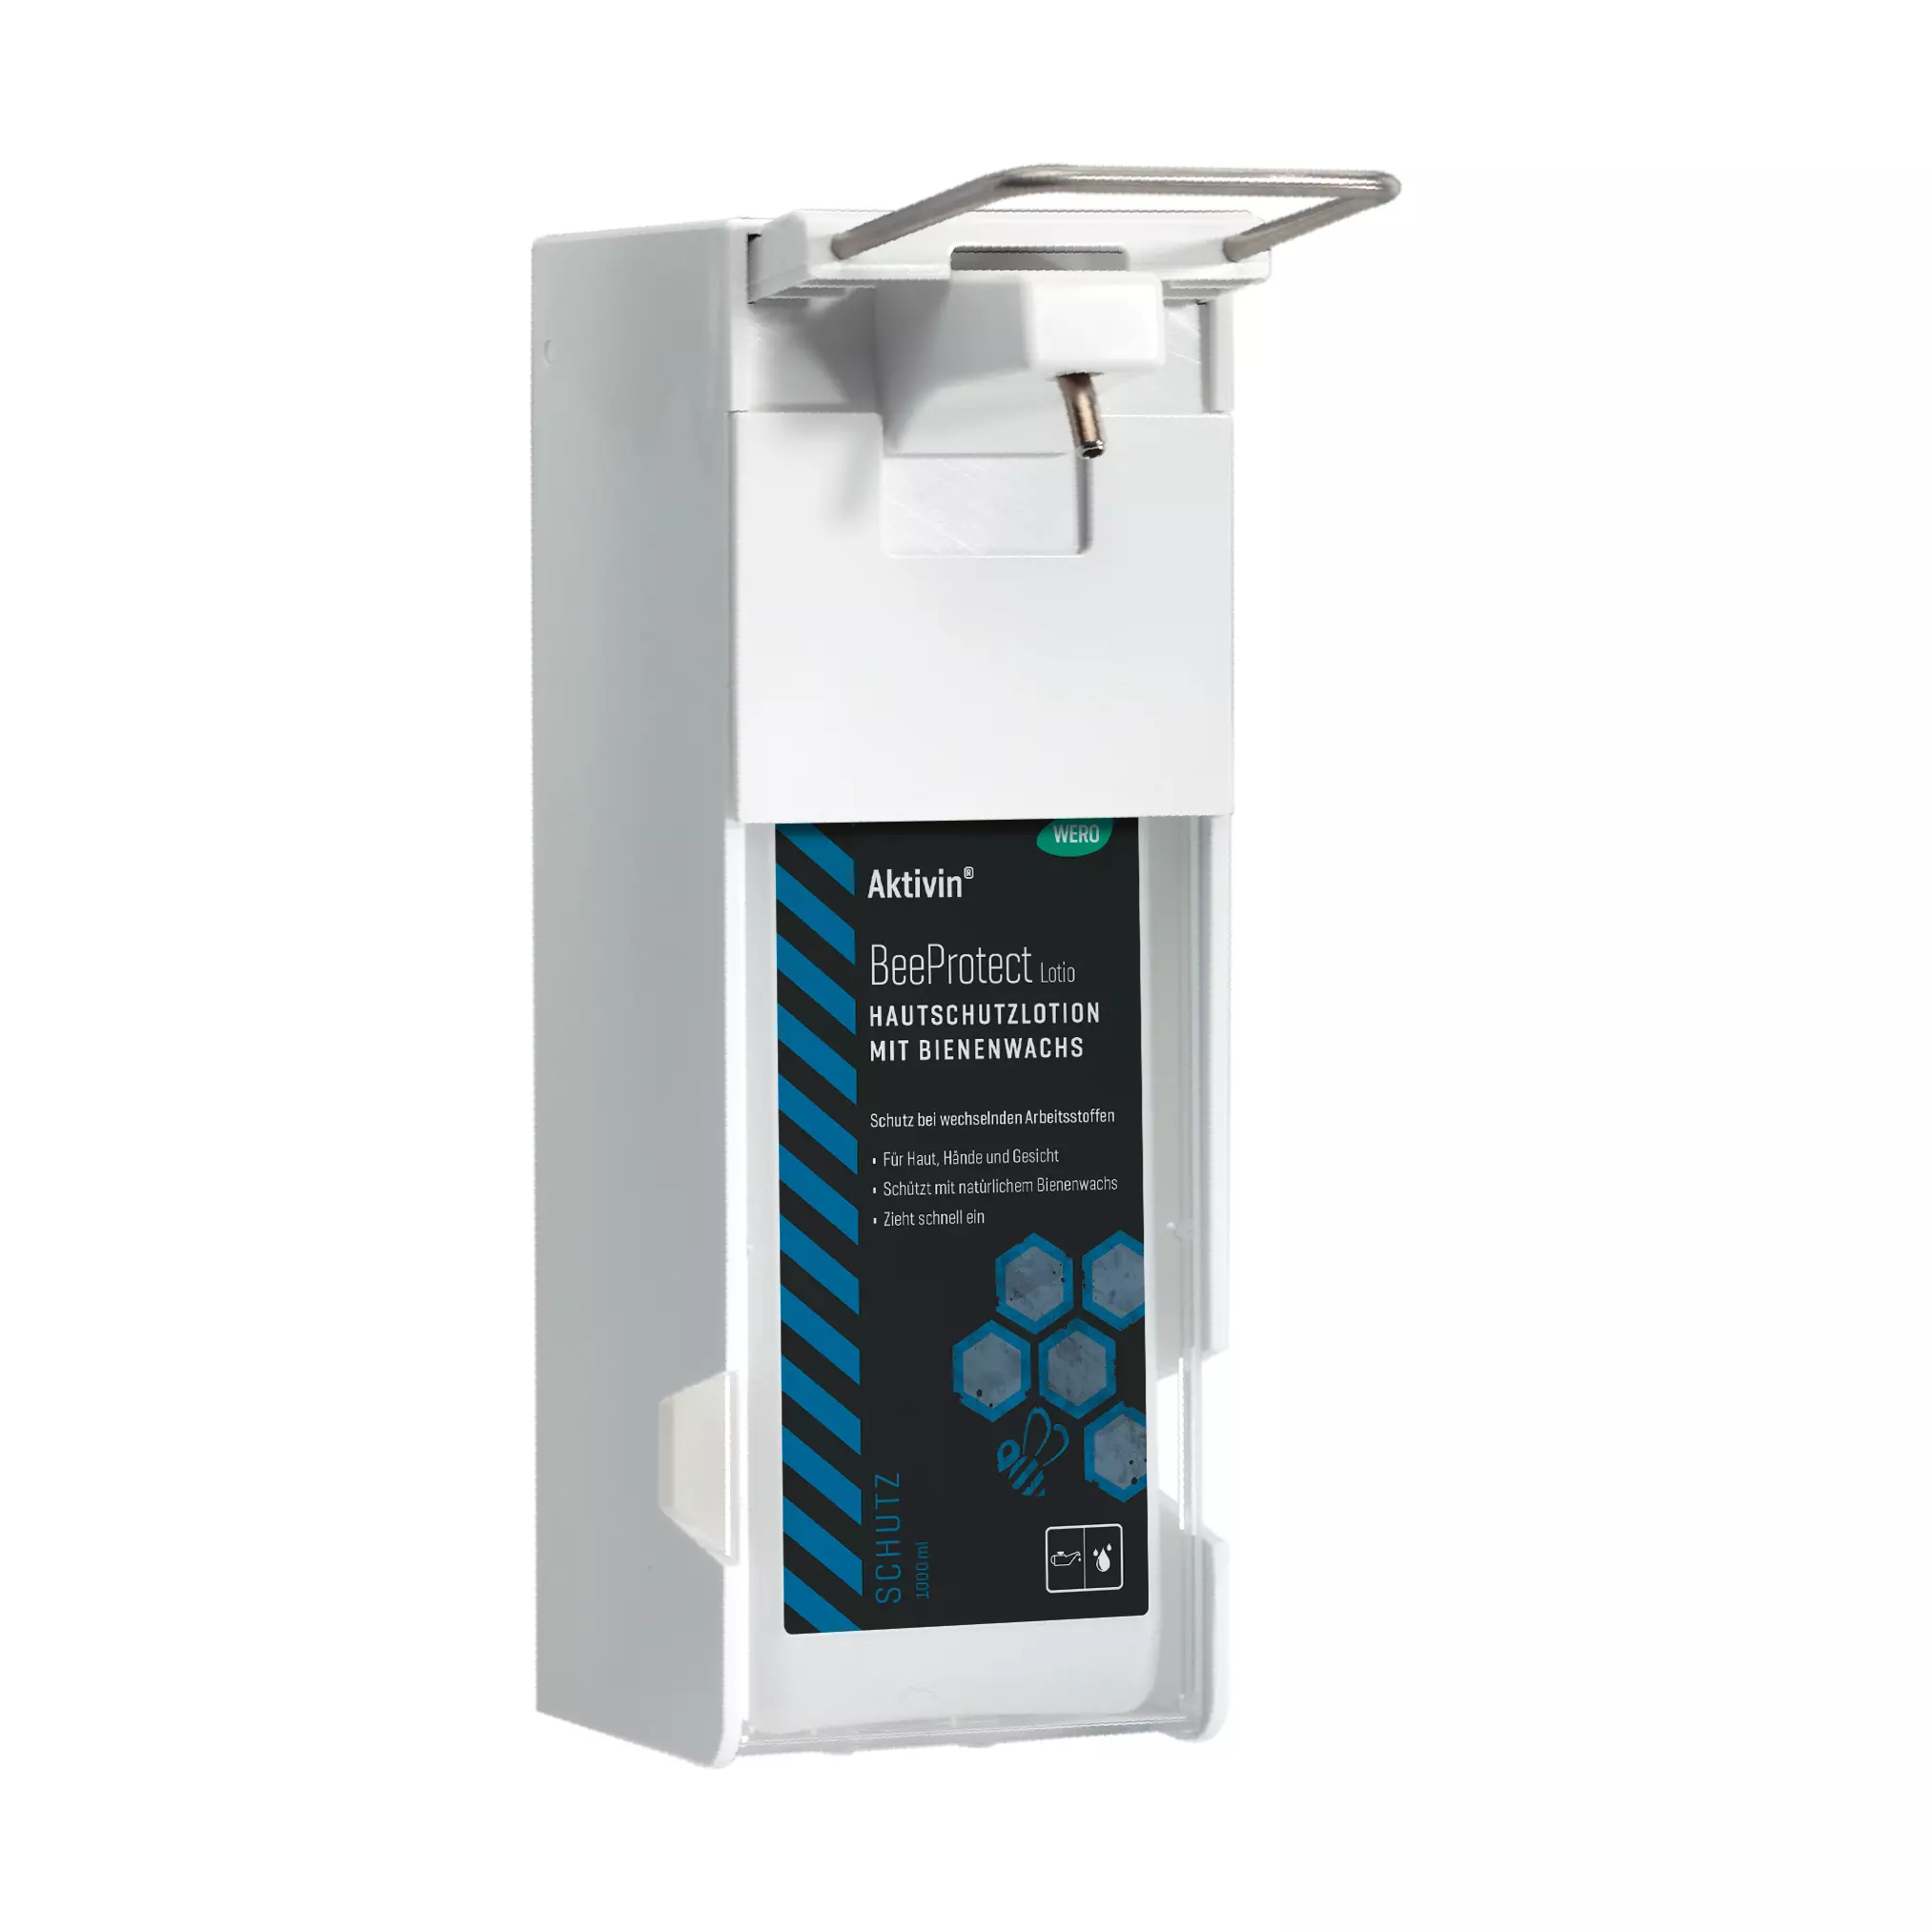 Direct plastic dispenser for liquid soaps, lotions and disinfectants